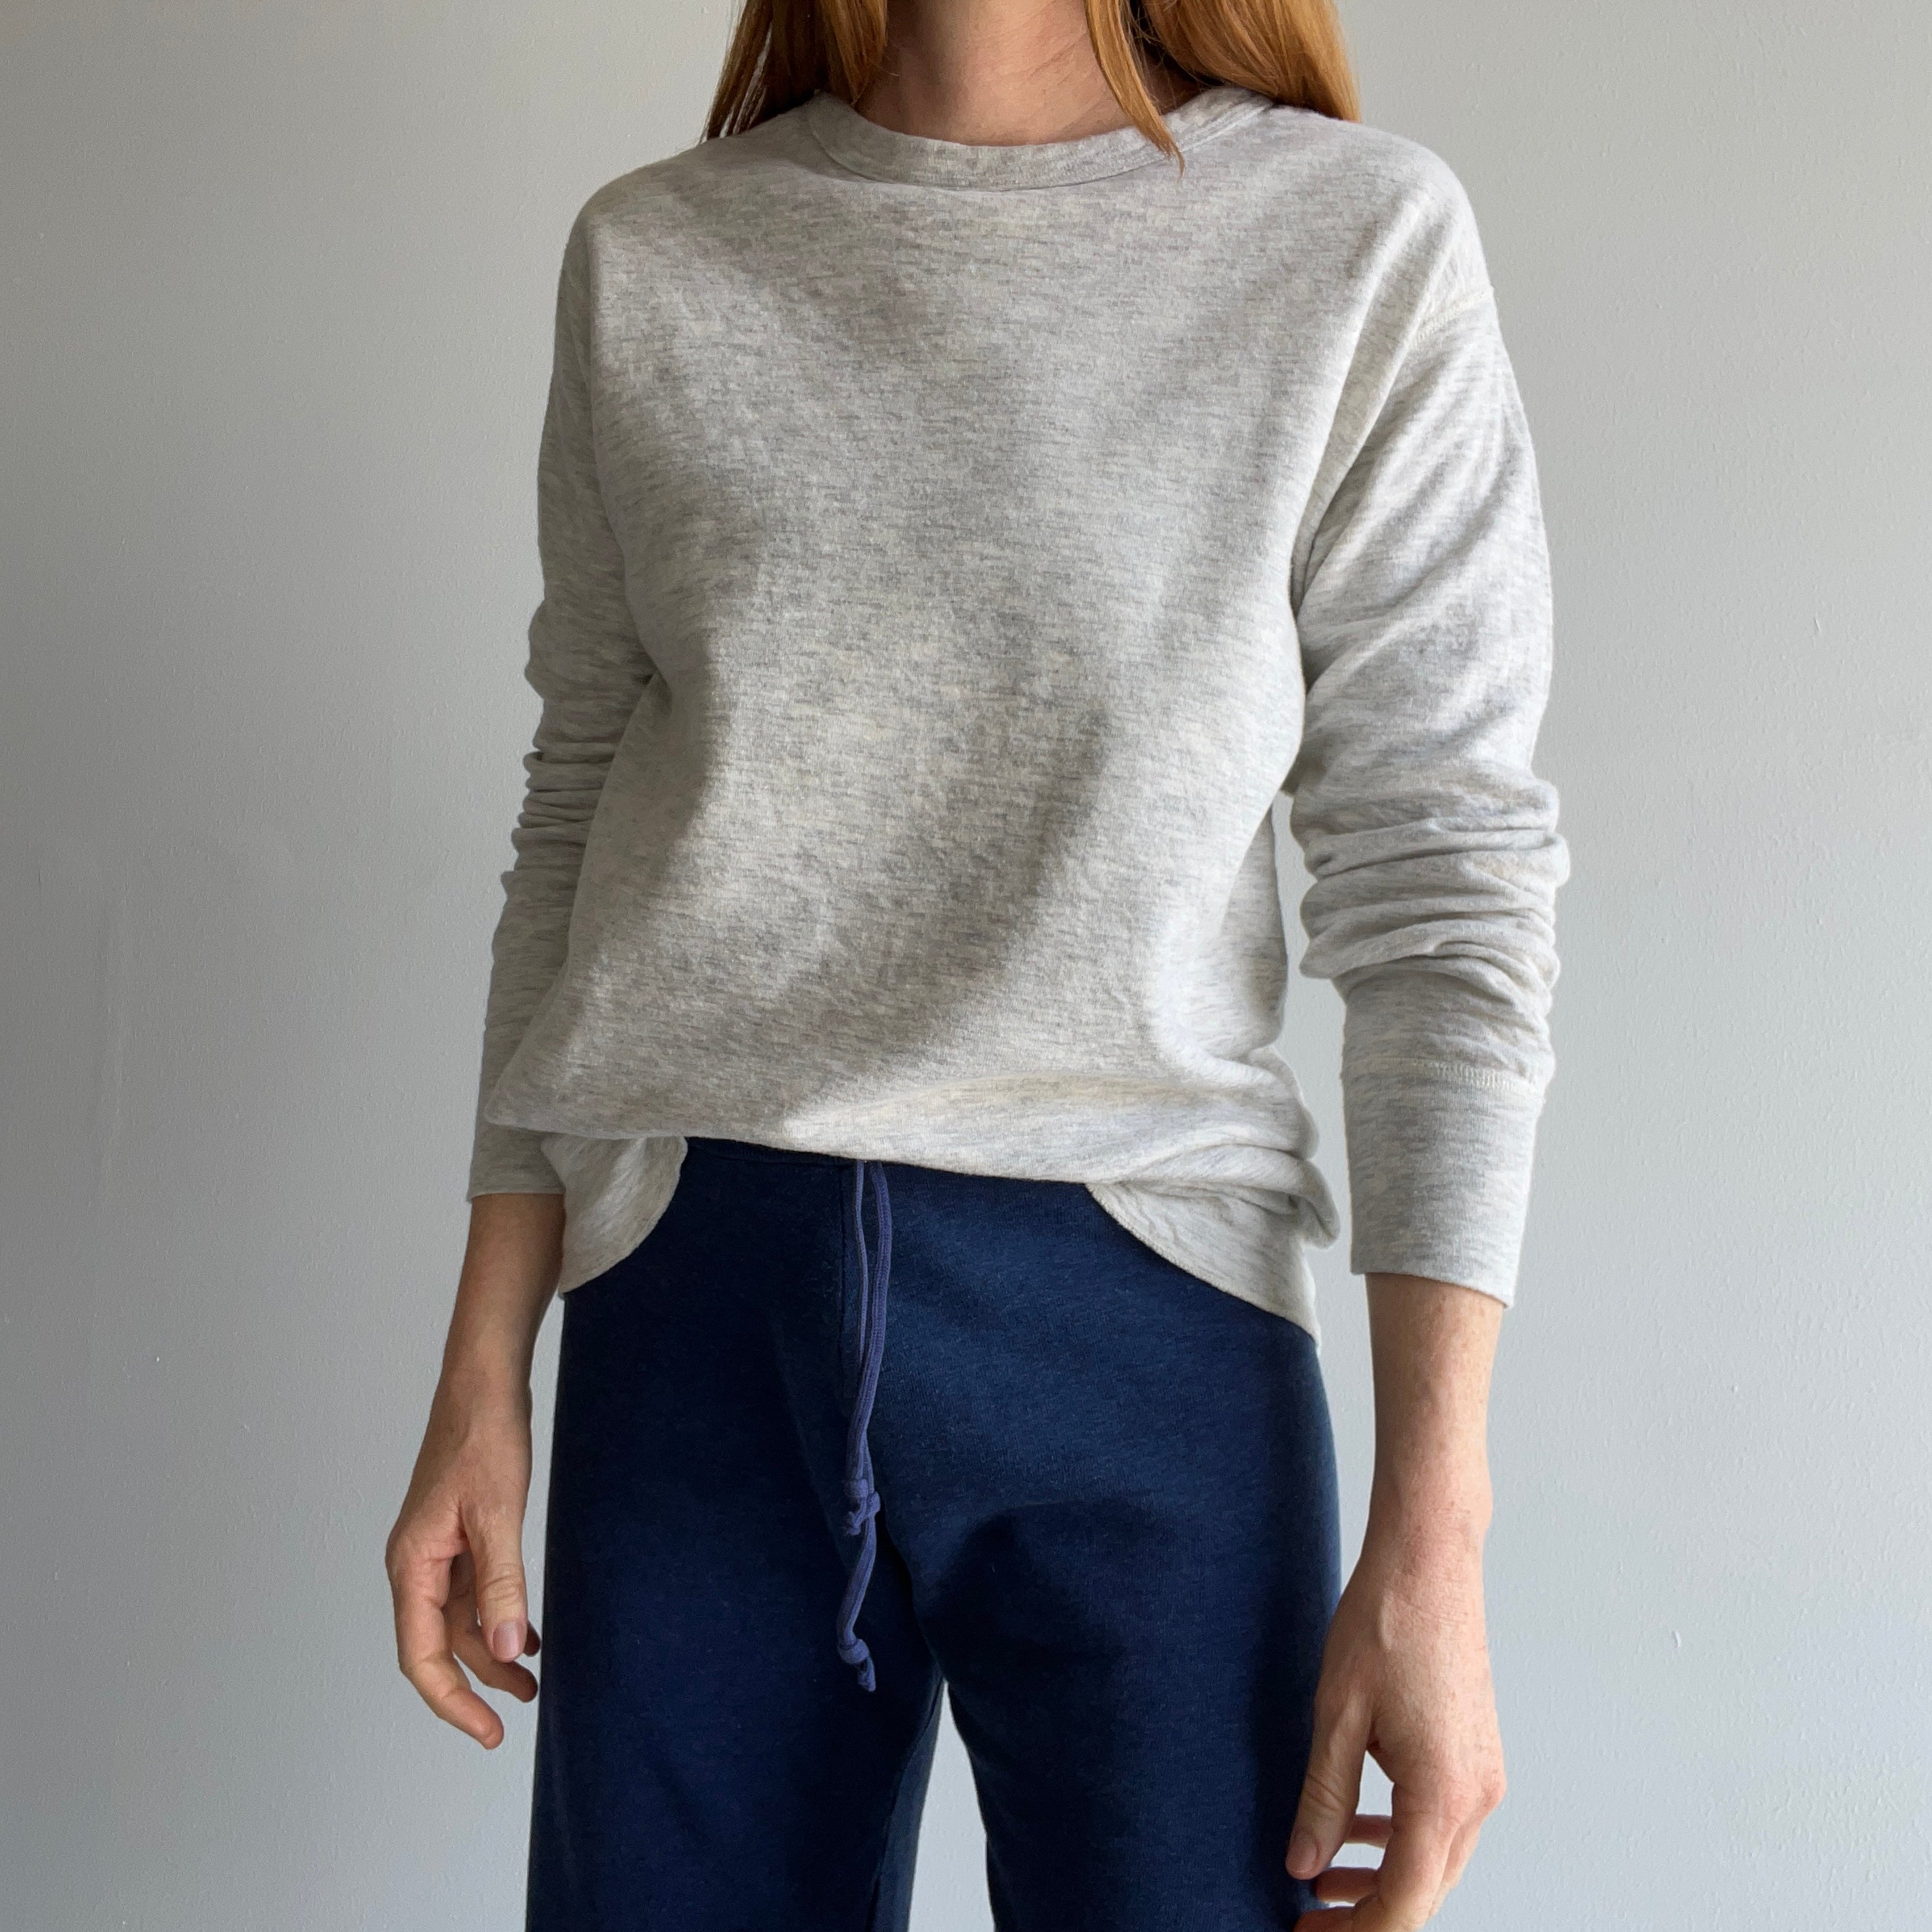 1980s Soft and Cozy Duofold Long Johns - !!!